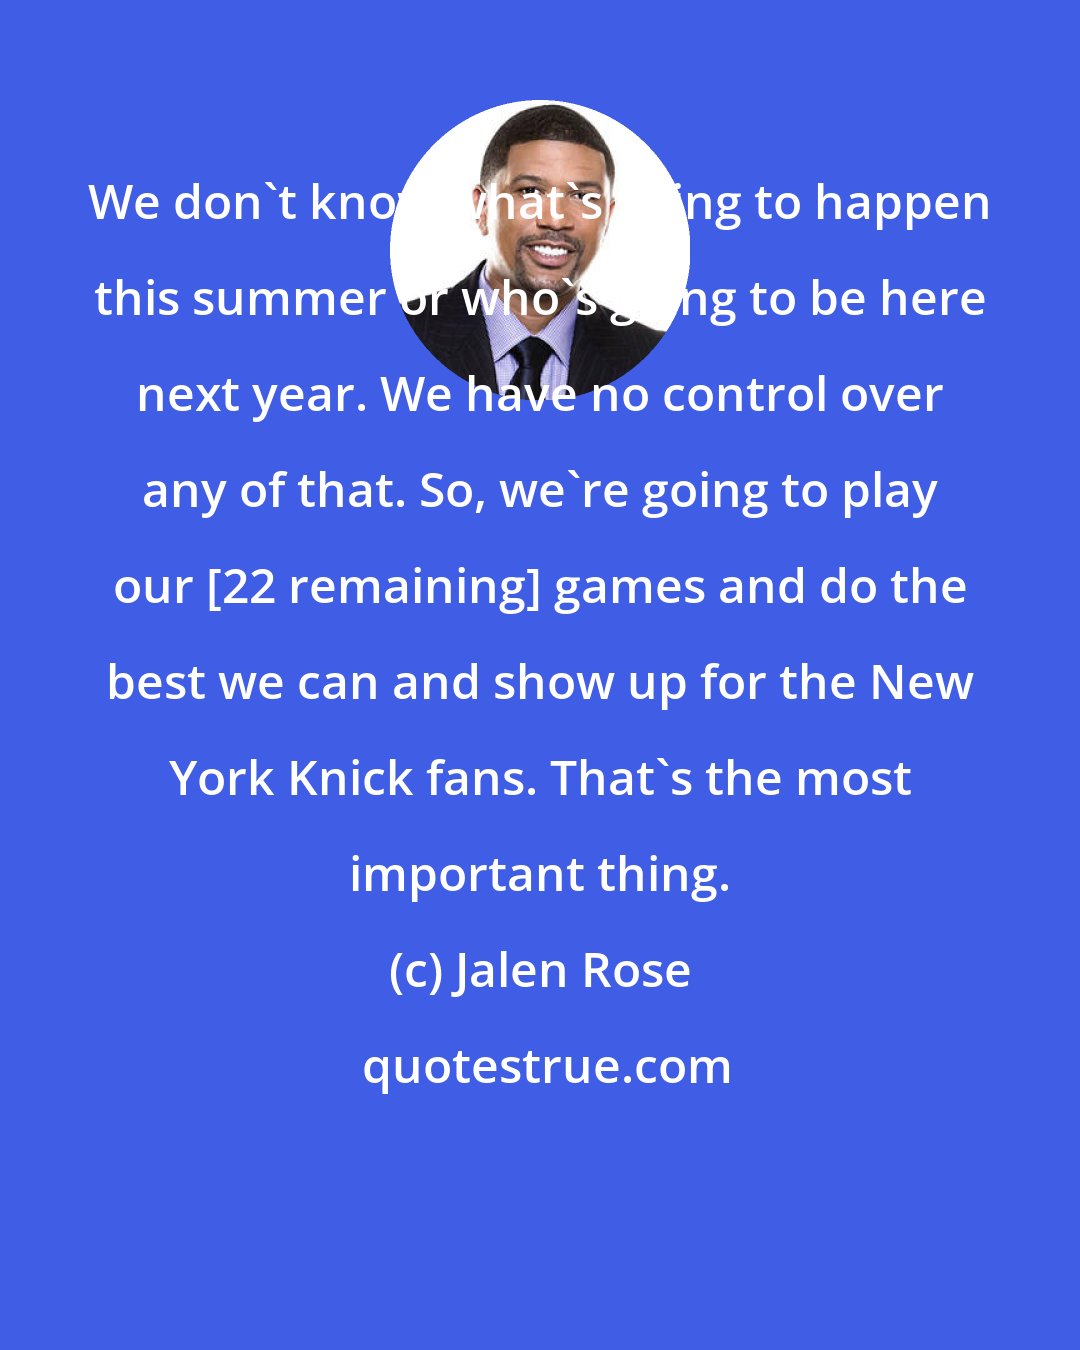 Jalen Rose: We don't know what's going to happen this summer or who's going to be here next year. We have no control over any of that. So, we're going to play our [22 remaining] games and do the best we can and show up for the New York Knick fans. That's the most important thing.